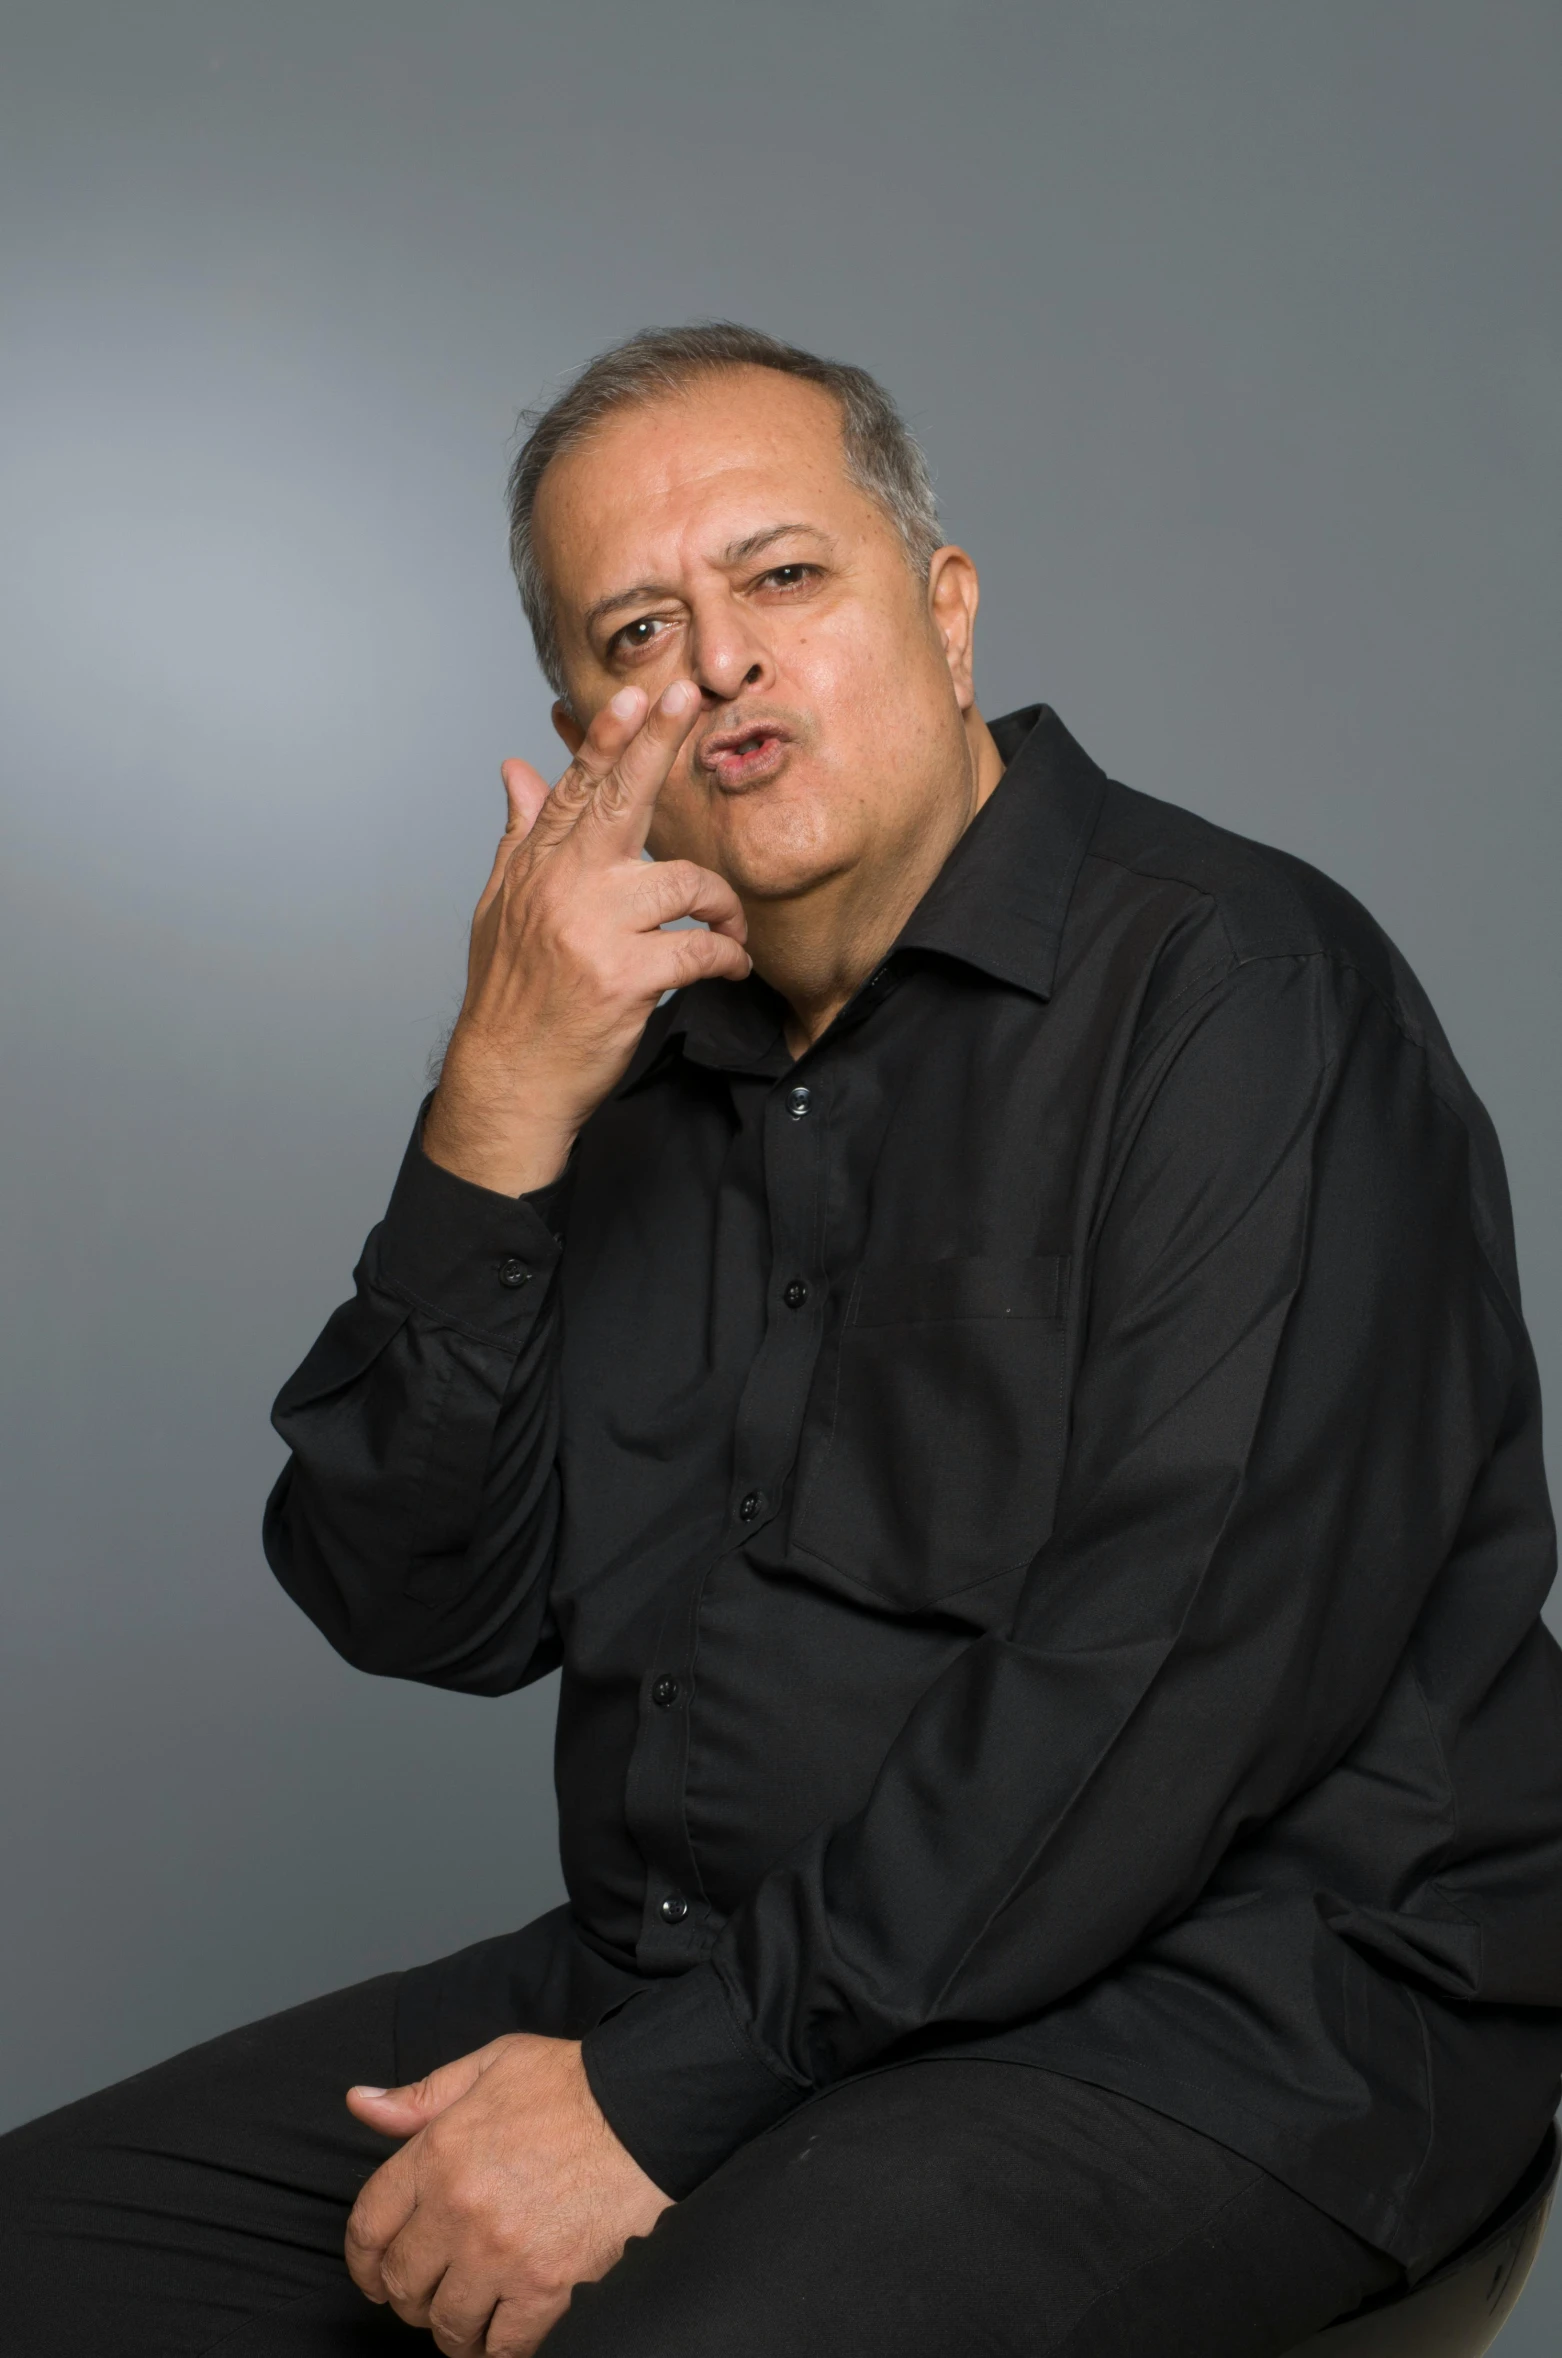 a man in a black shirt sitting on a stool, an album cover, inspired by Mahmoud Farshchian, pointing index finger, stern expression, on clear background, no crop